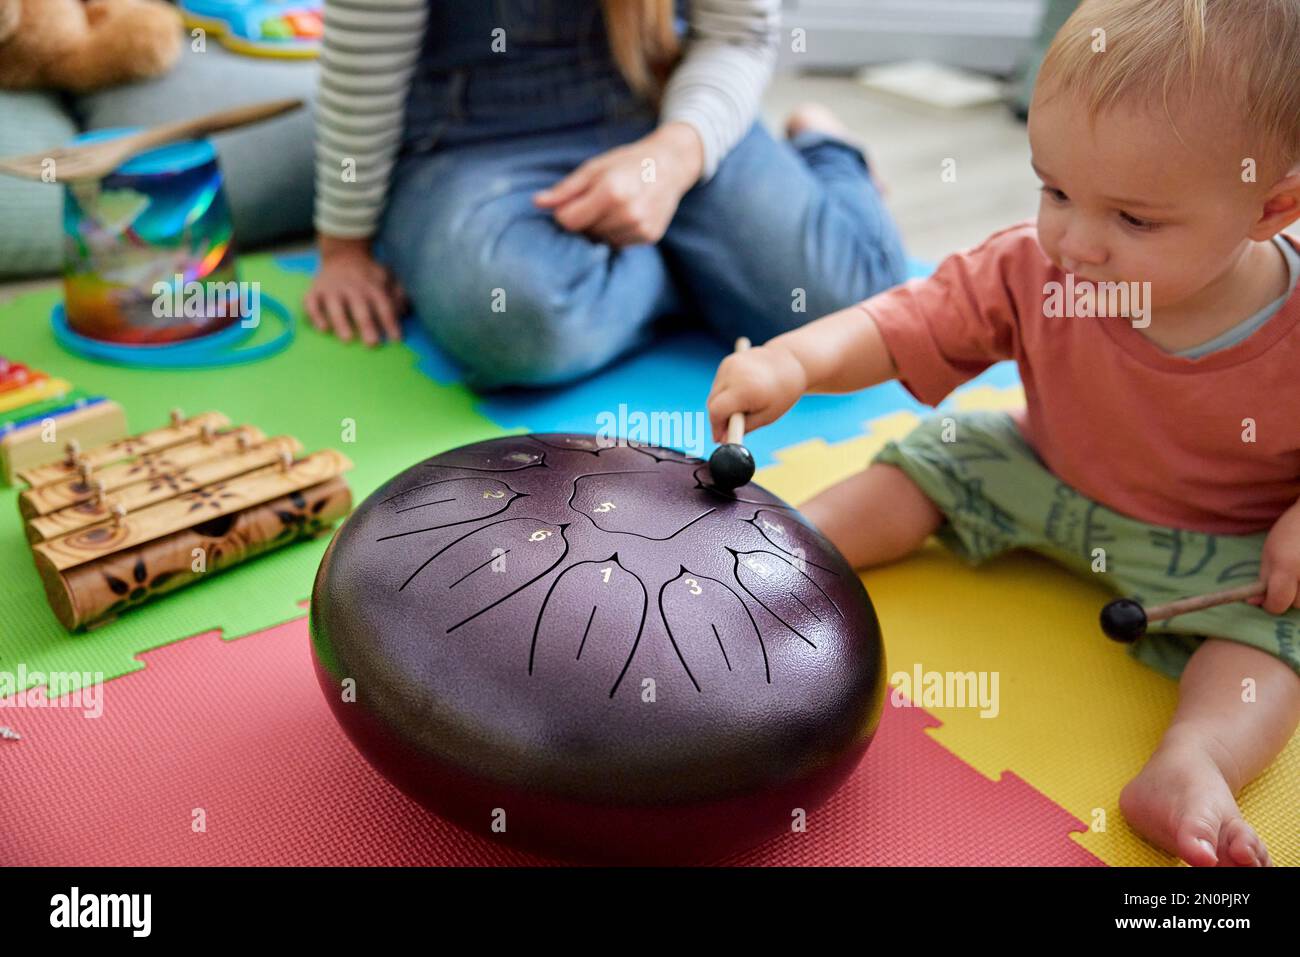 Toddler playing with musical instrument in playroom with mother sitting nearby Stock Photo